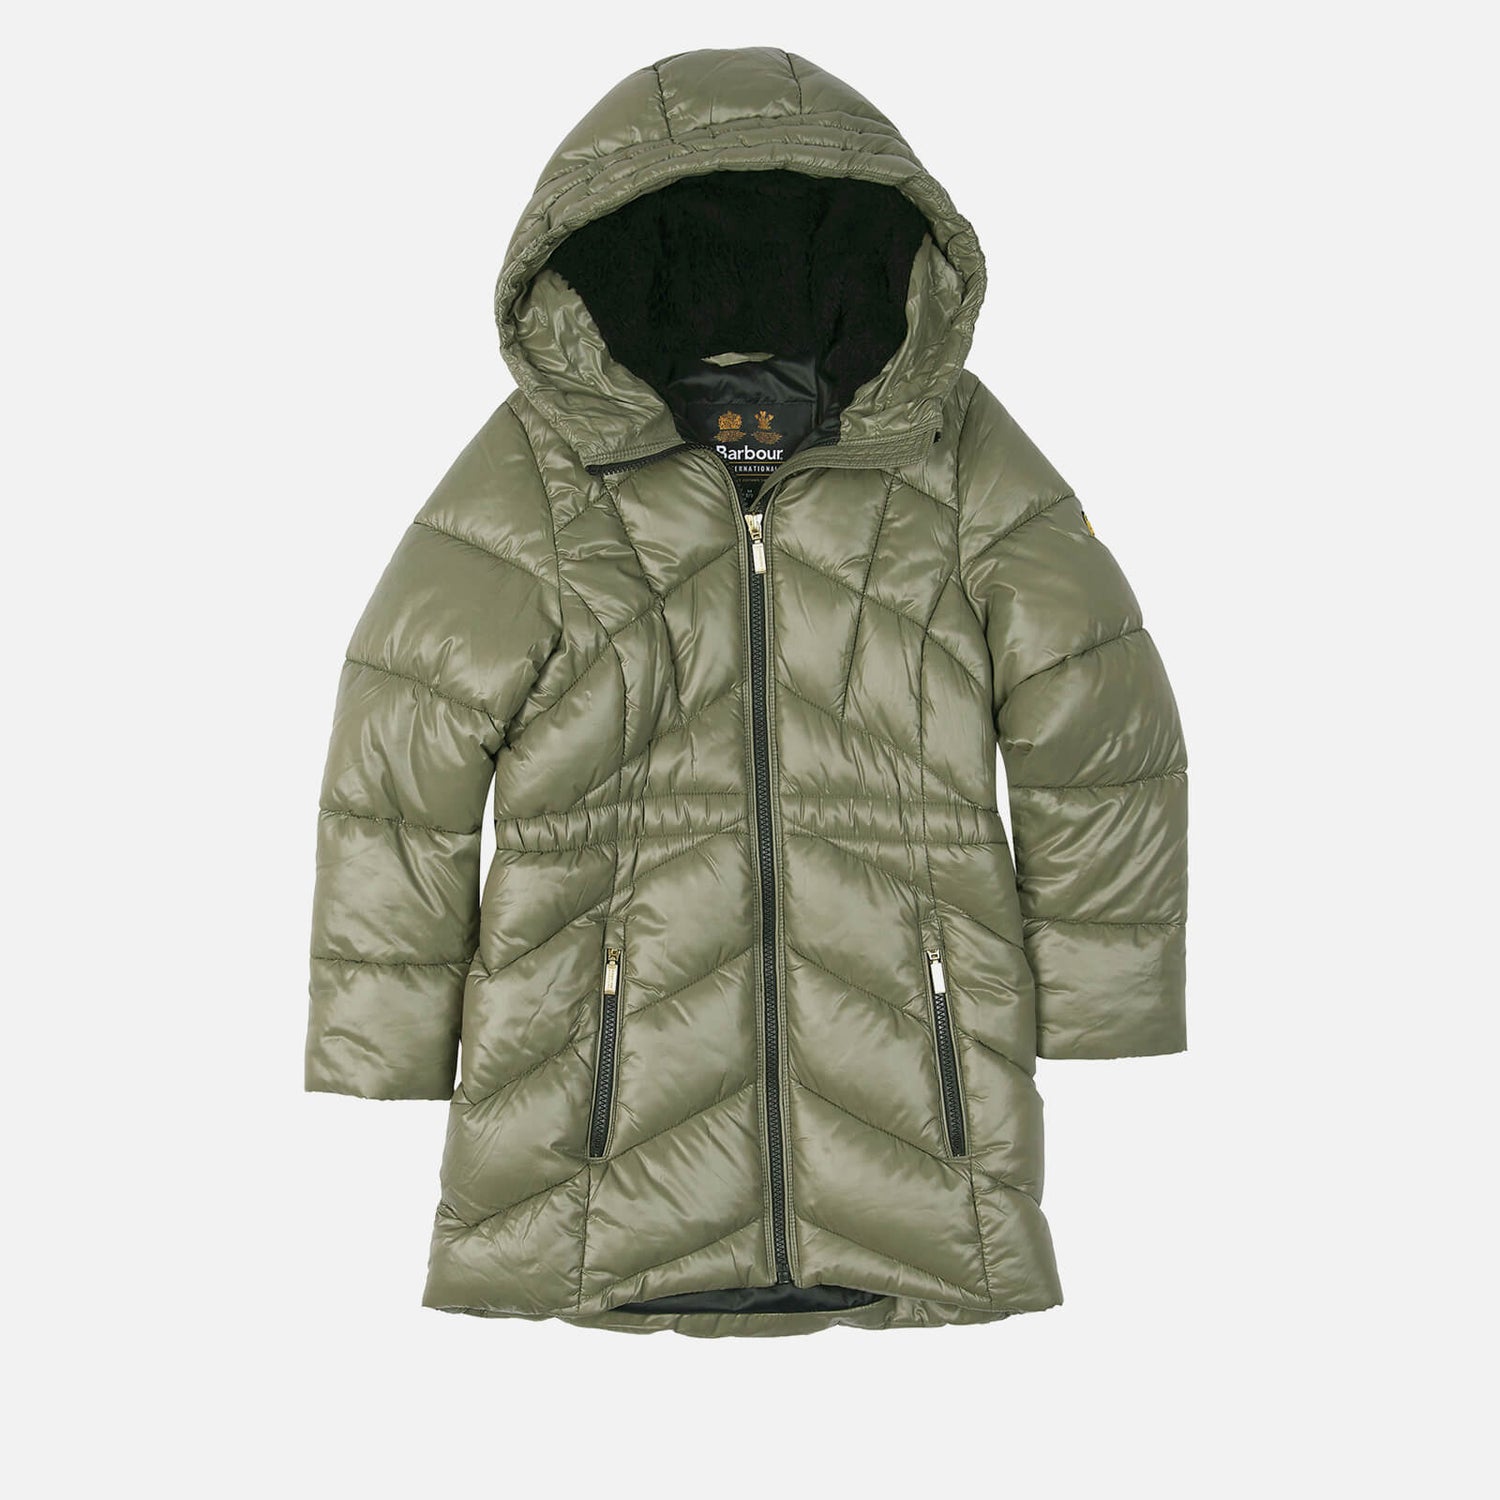 Barbour International Salta Quilt Shell Jacket - S (6-7 Years)